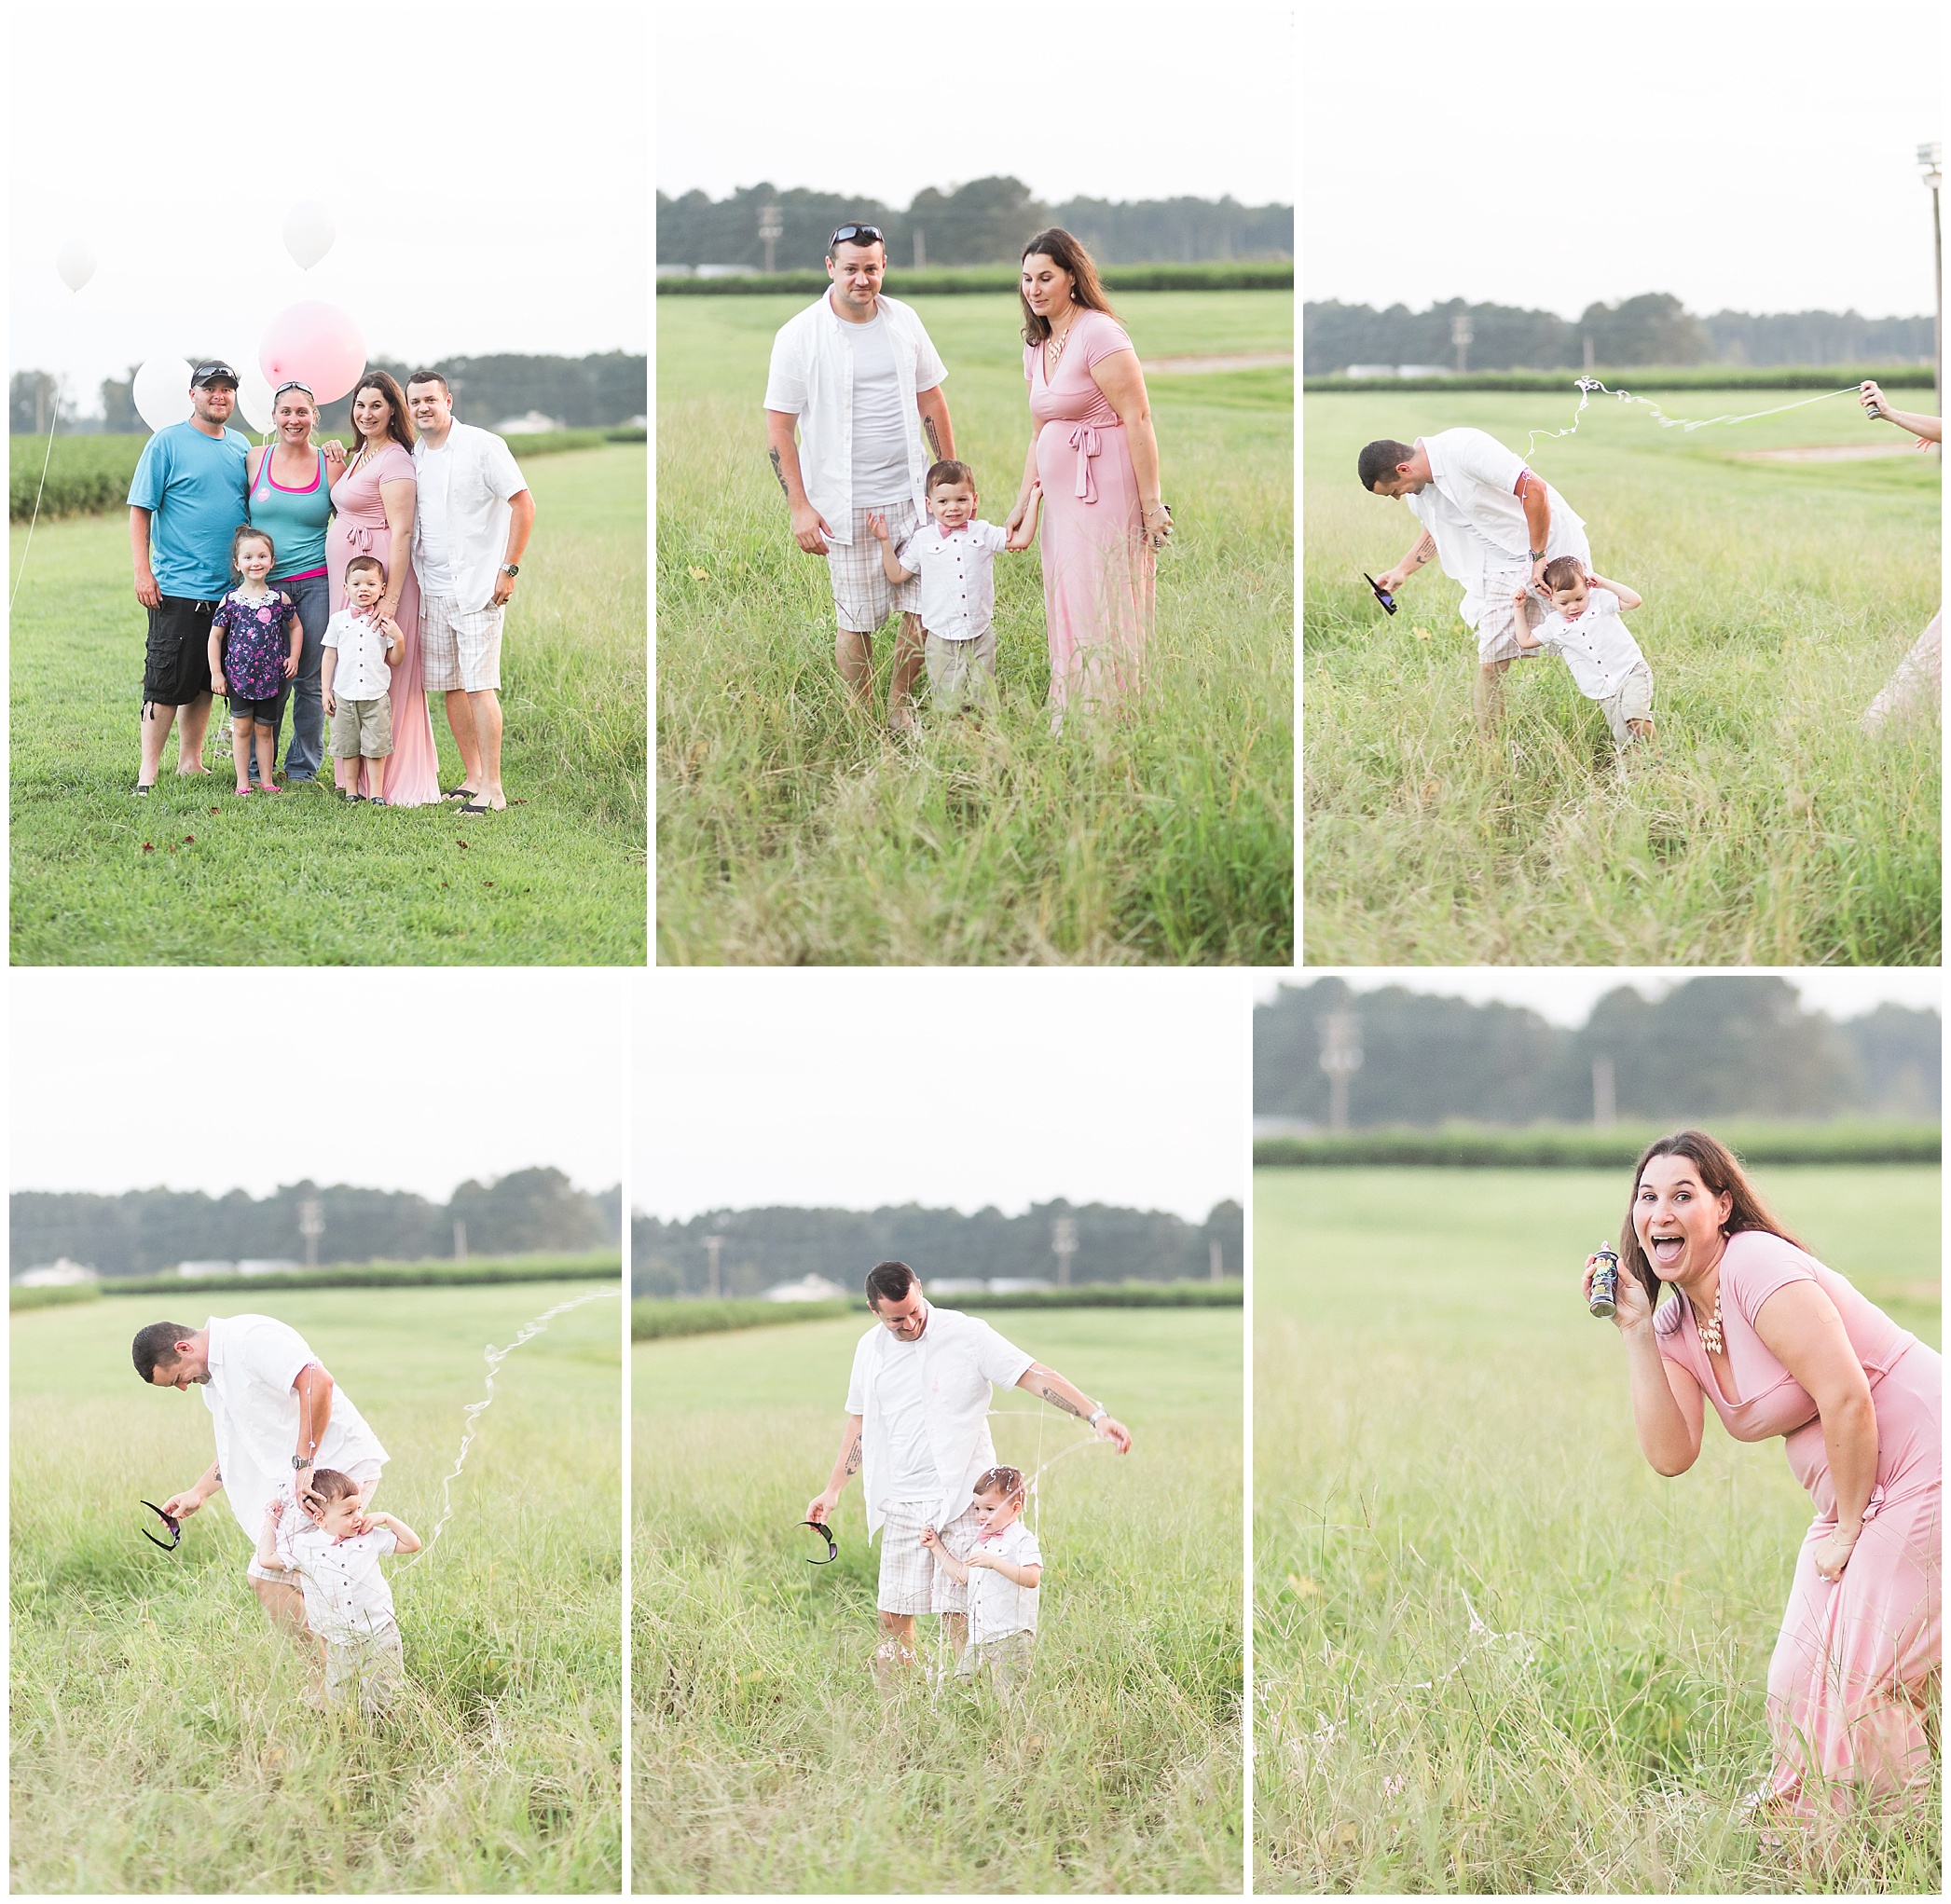  Julie, David, and Laynie helped me with one last surprise I had up my sleeve. They held on to the pink silly string until our photos were done so I could get Hunter and Liam. I am not outnumbered anymore lol! I scared my poor Liam at first though un